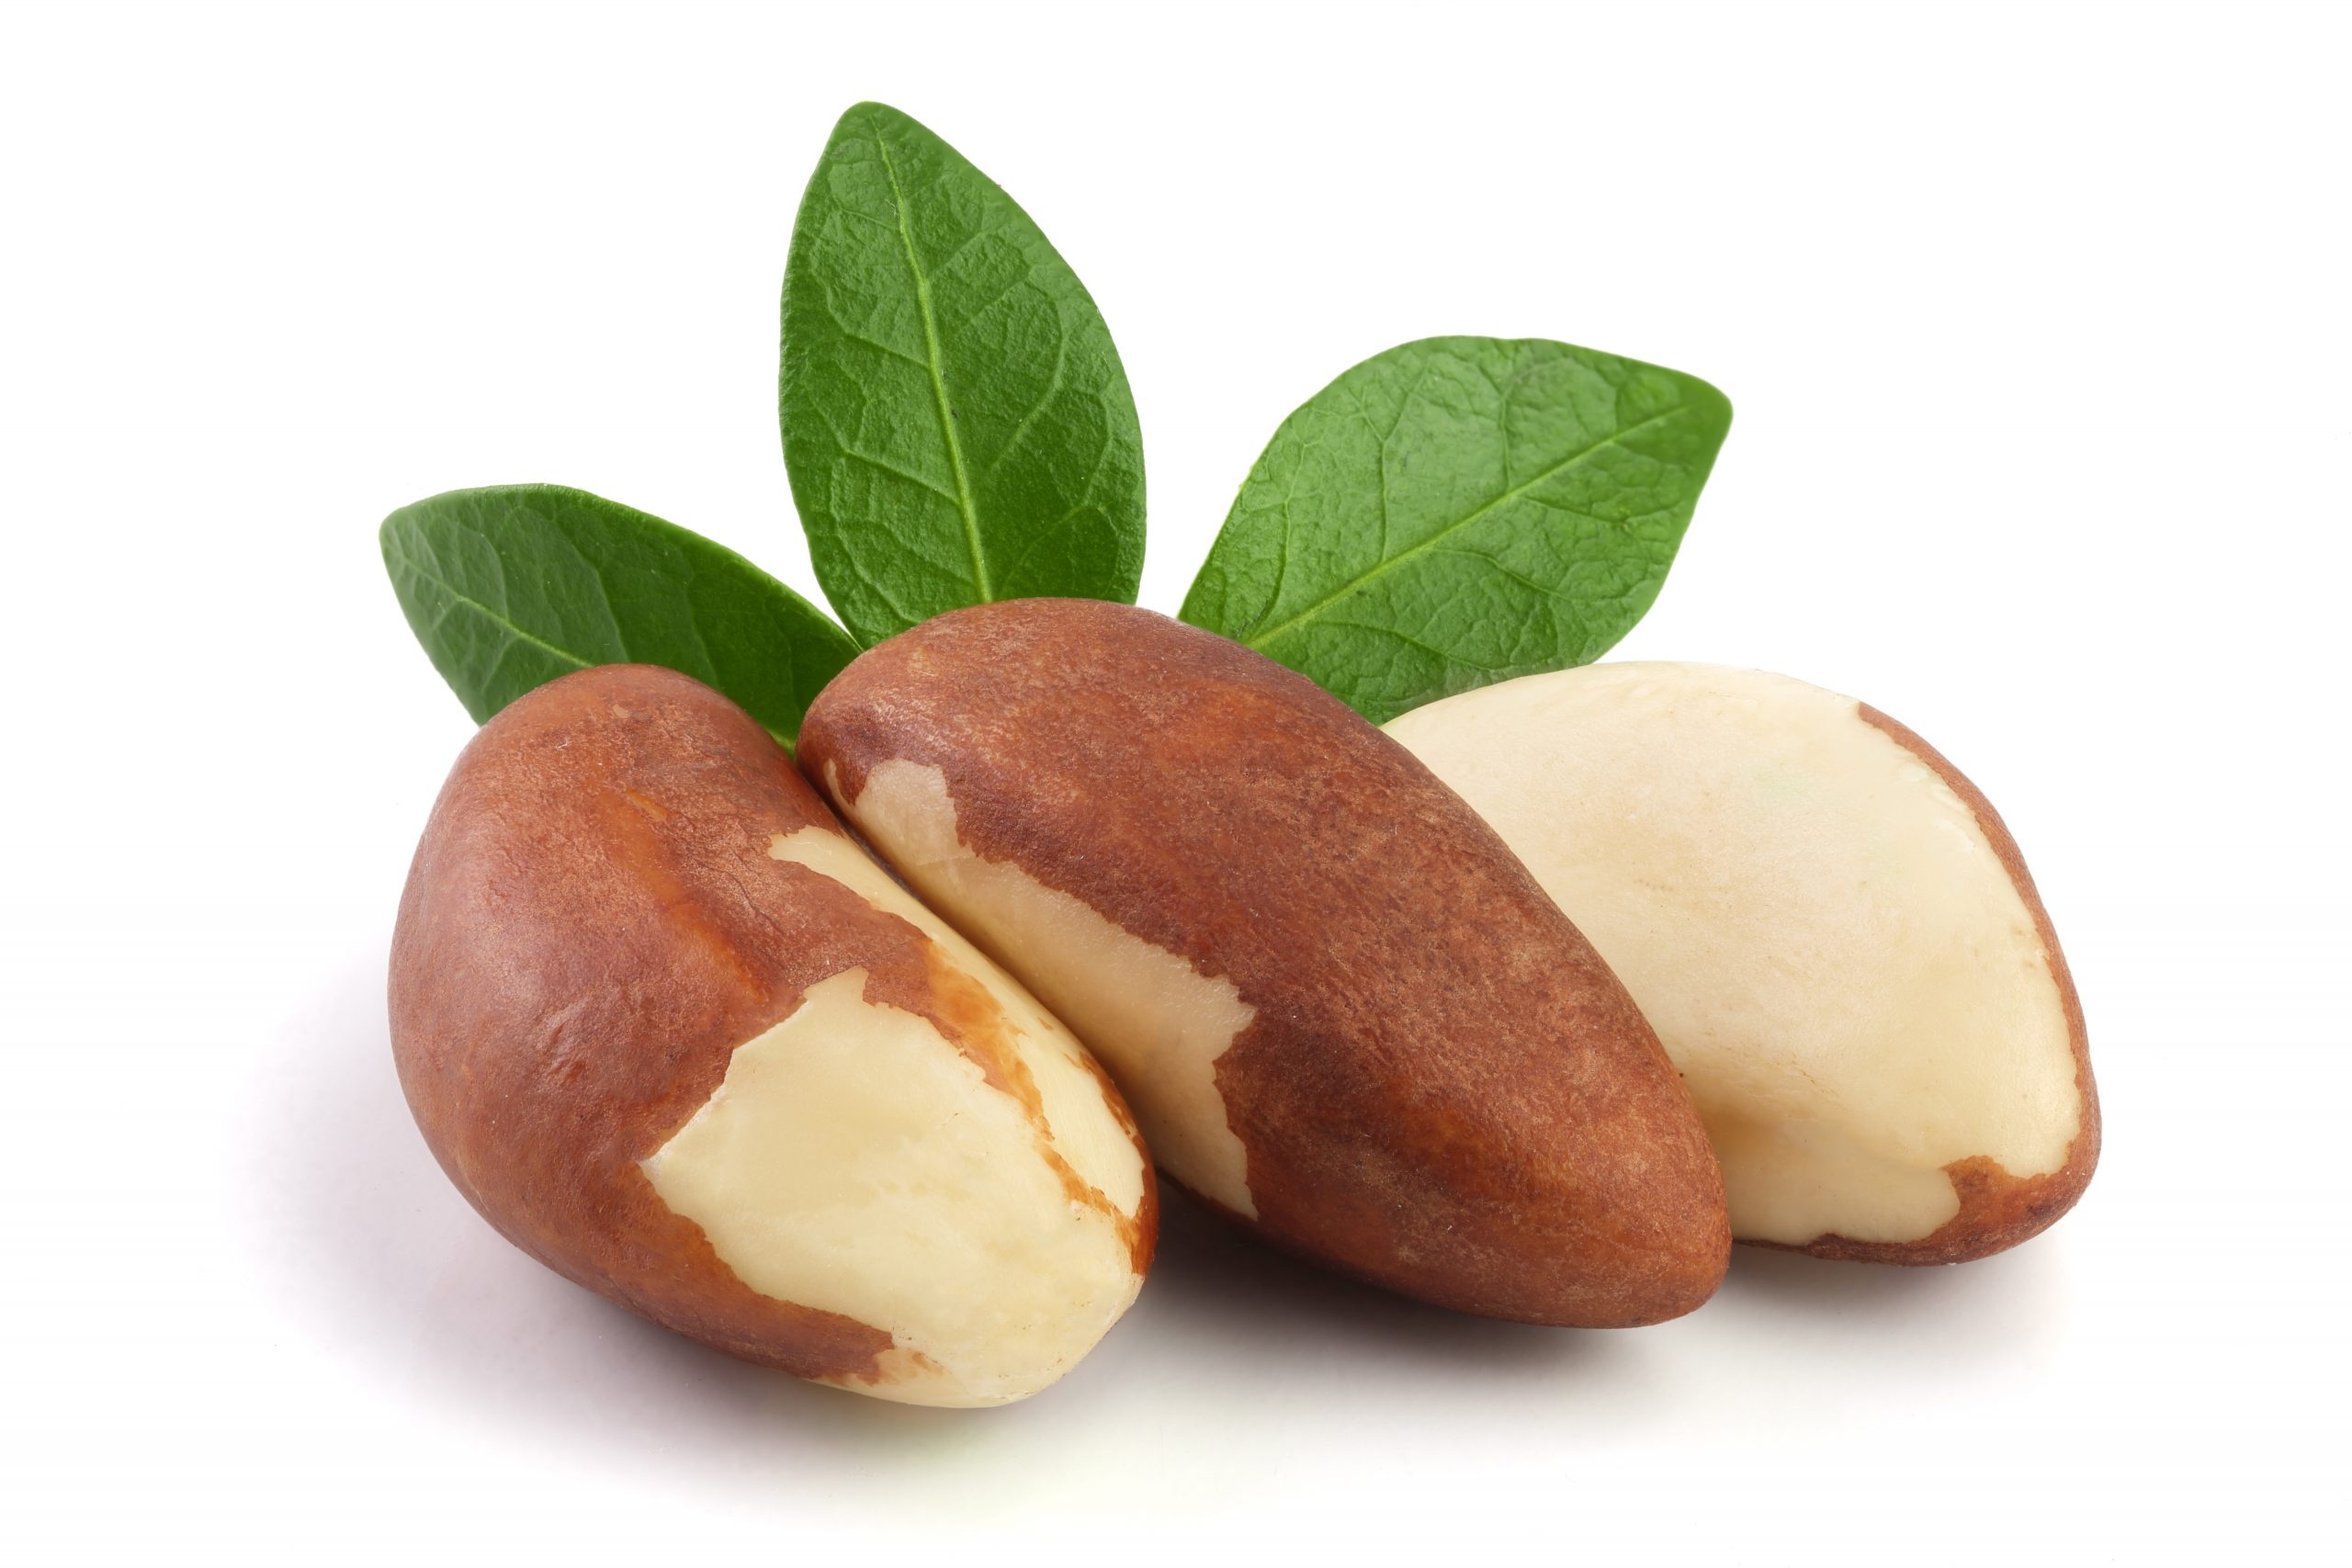 Brazil Nuts: A rich source of proteins carbohydrates and fats, Widely consumed by the Amazonian population. 2560x1710 HD Wallpaper.